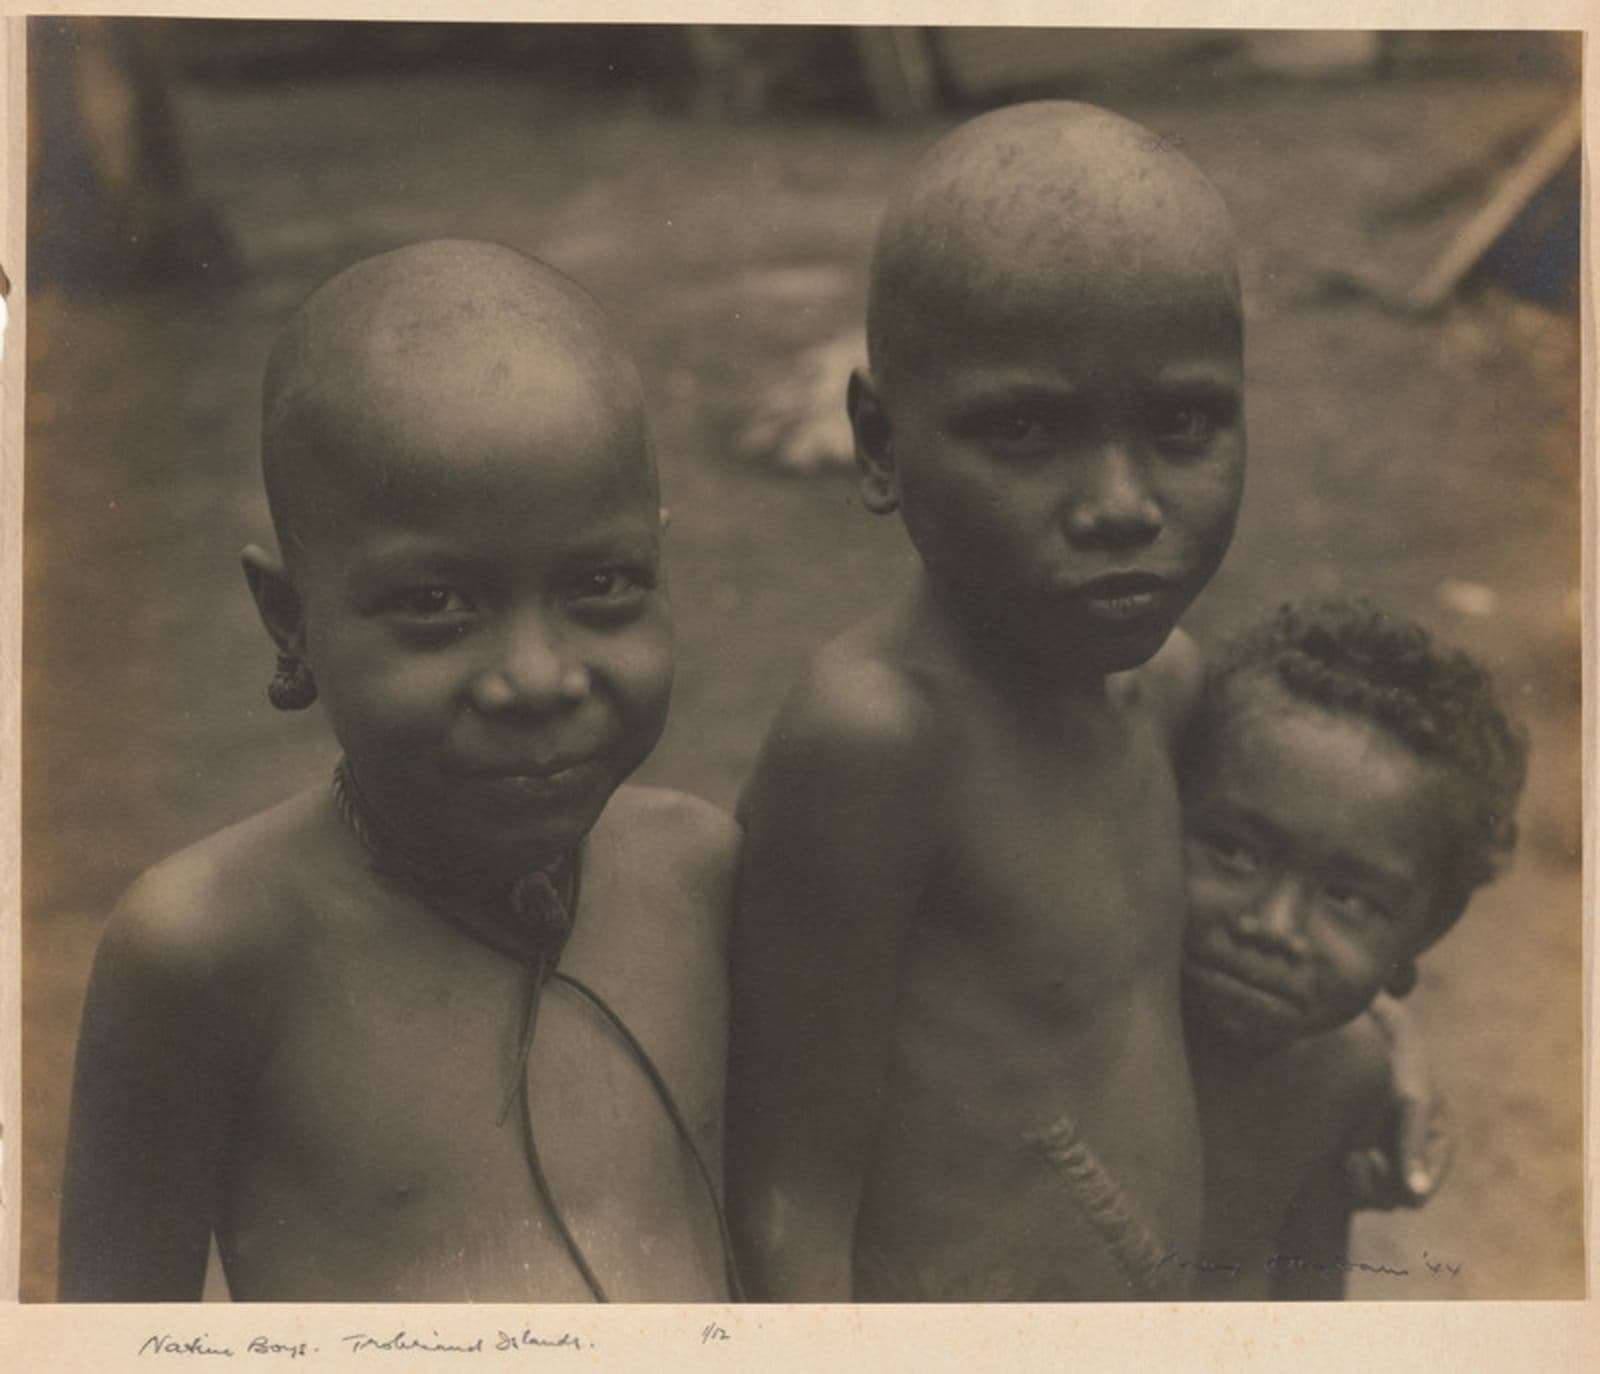 Photograph of three boys. Two are bald but the youngest has curly hair.